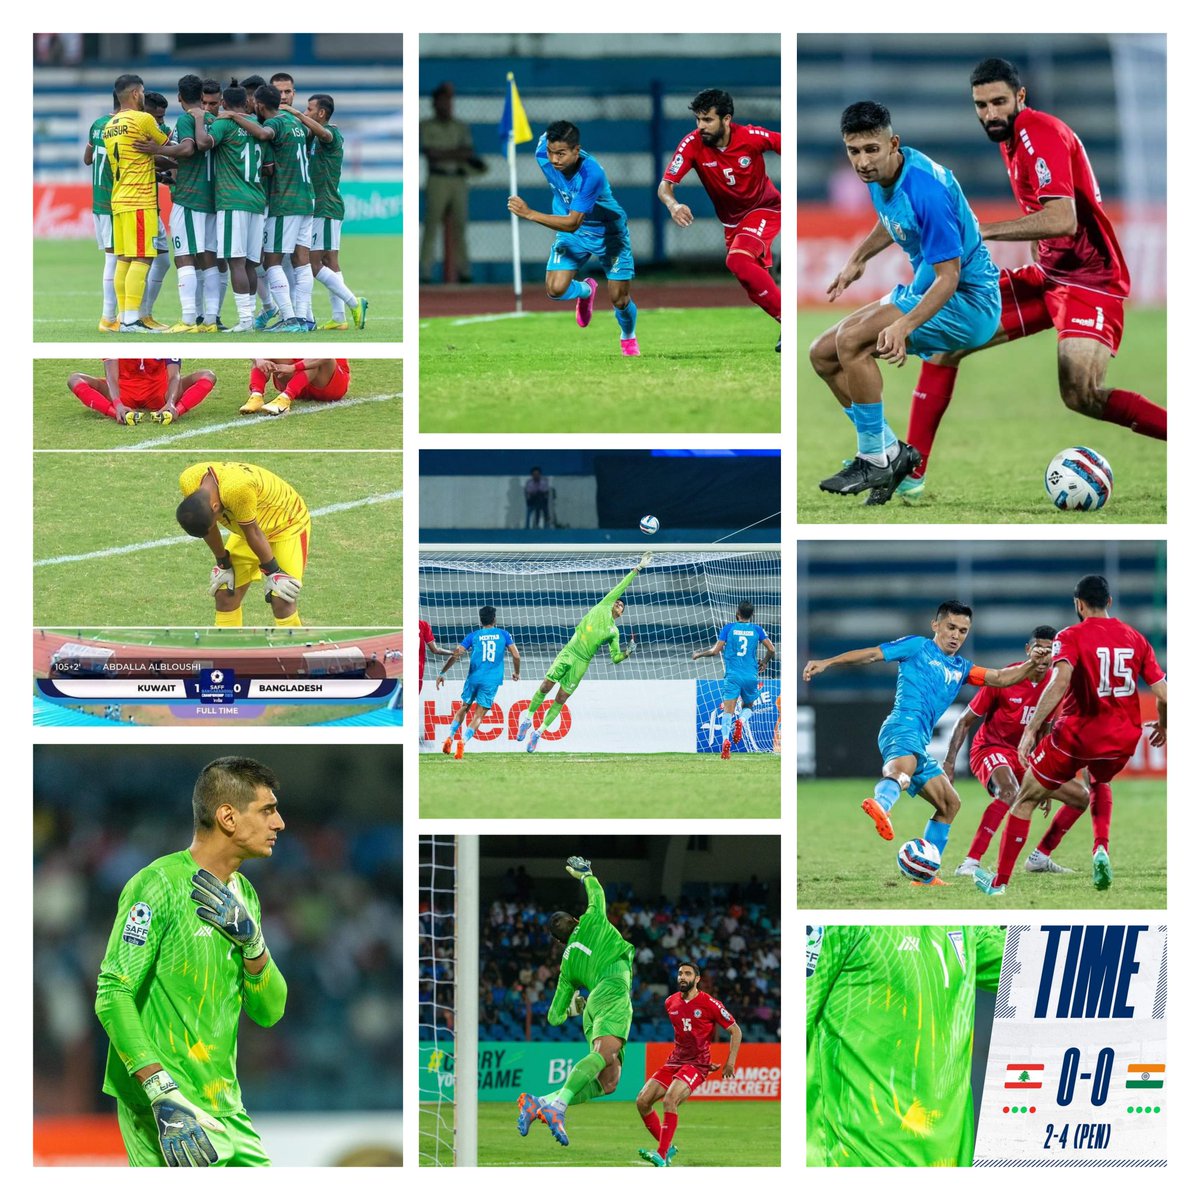 #Report | India stood their ground during the tie-breaker to see off their win against Lebanon in the semis! 🤩

#IndianFootball #SAFFChampionship2023 #LBNIND #BackTheBlue #BlueTigers #SAFF  #SAFFChampionship2023 #BlueTigers #BackTheBlue #IndianFootball  #GreenMaroonloyalUltras